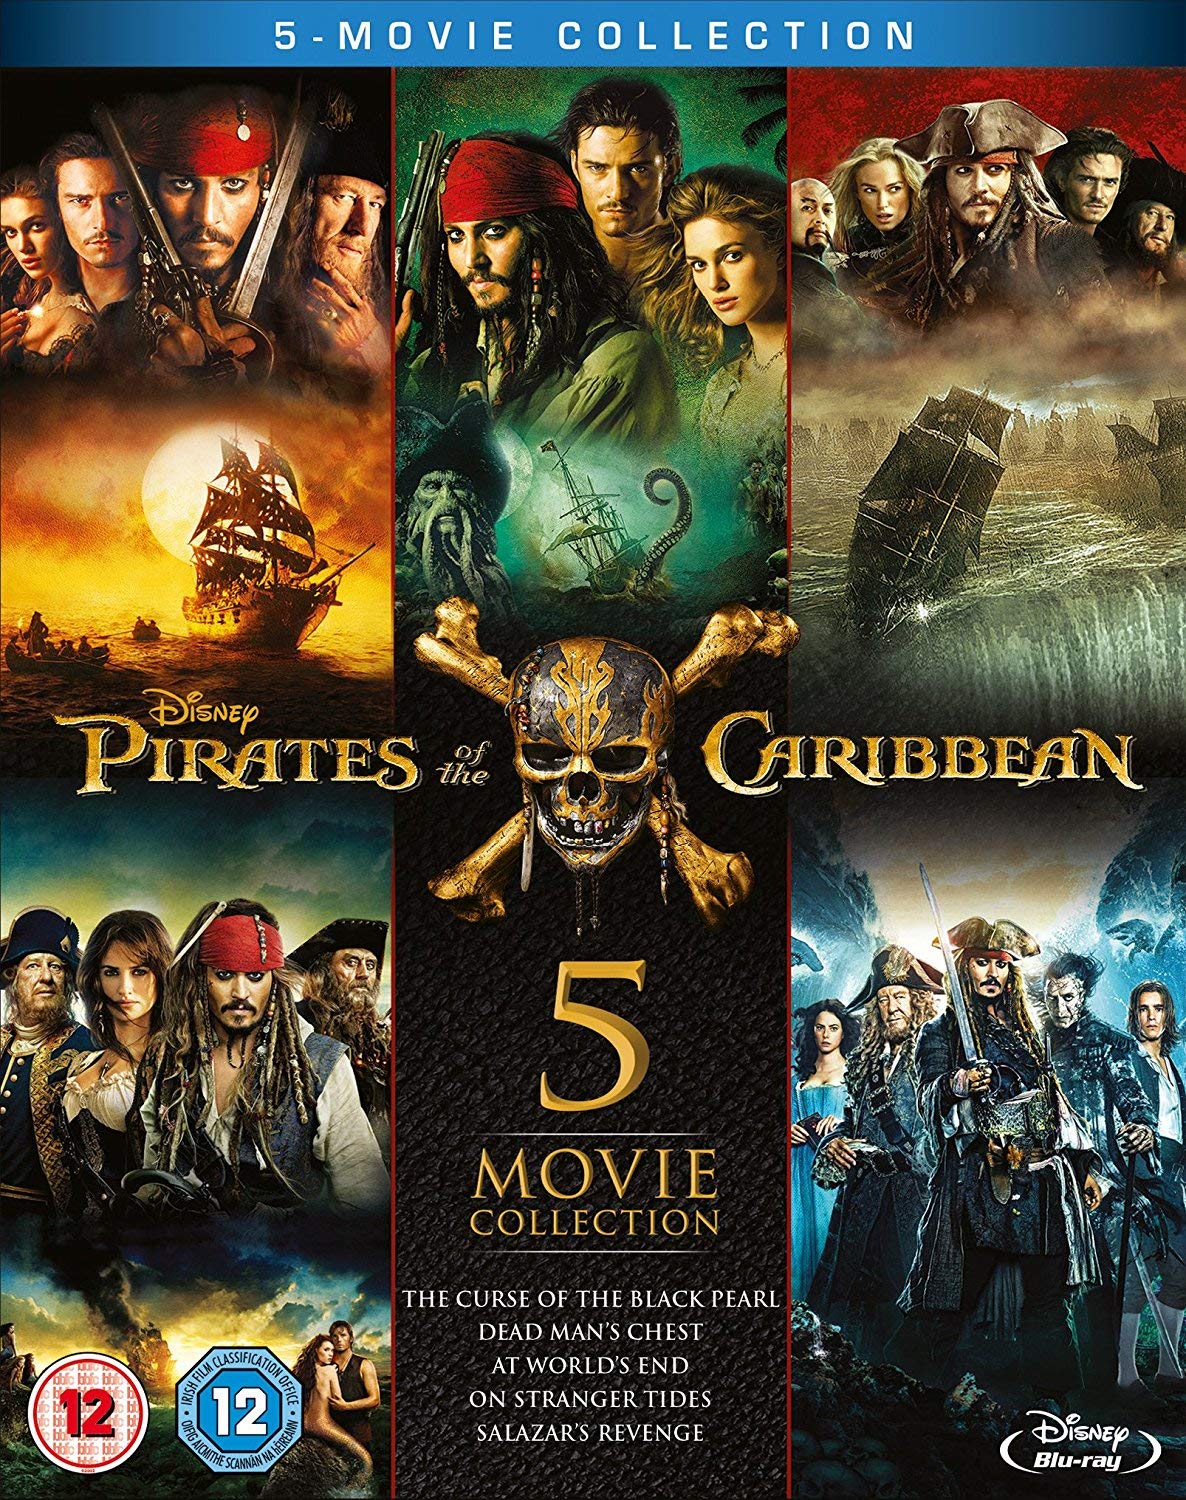 Pirates of the Caribbean (Blu-ray)  - 5 Movie Collection